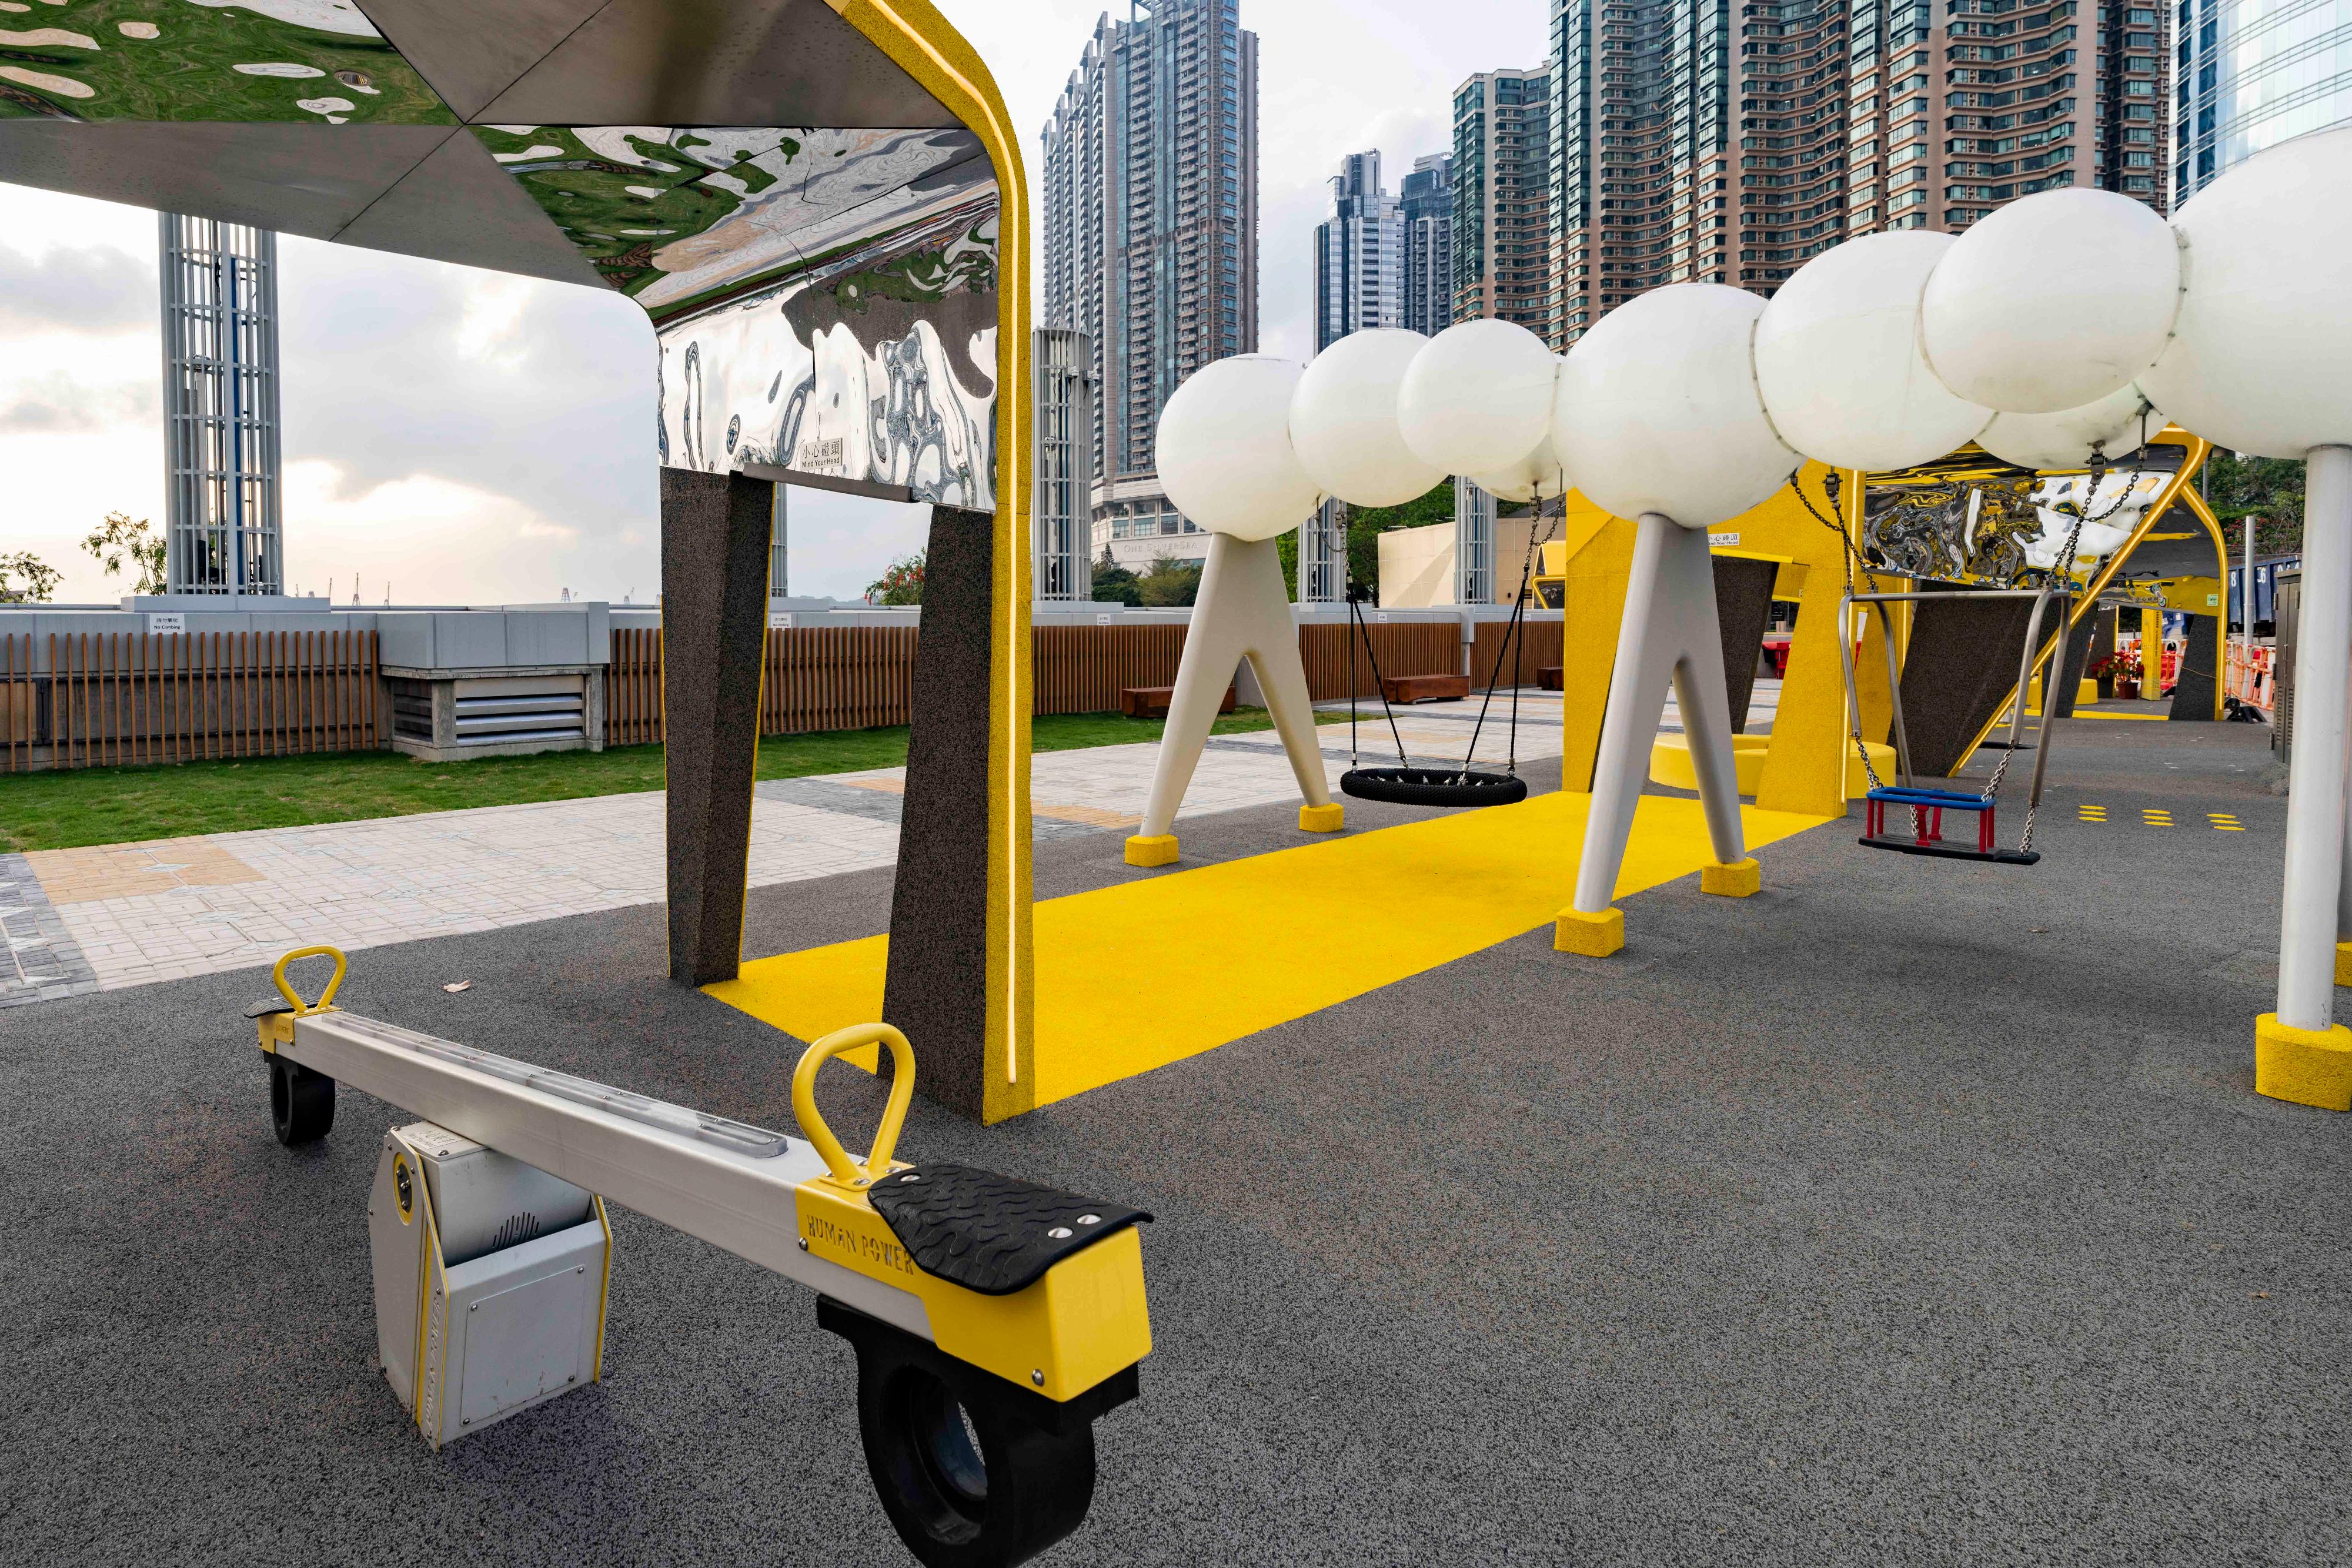 The Hoi Fai Road Playable Space in Tai Kok Tsui is open for public use from today (March 18). Photo shows the seesaw and parent-child swings at the Playable Space.